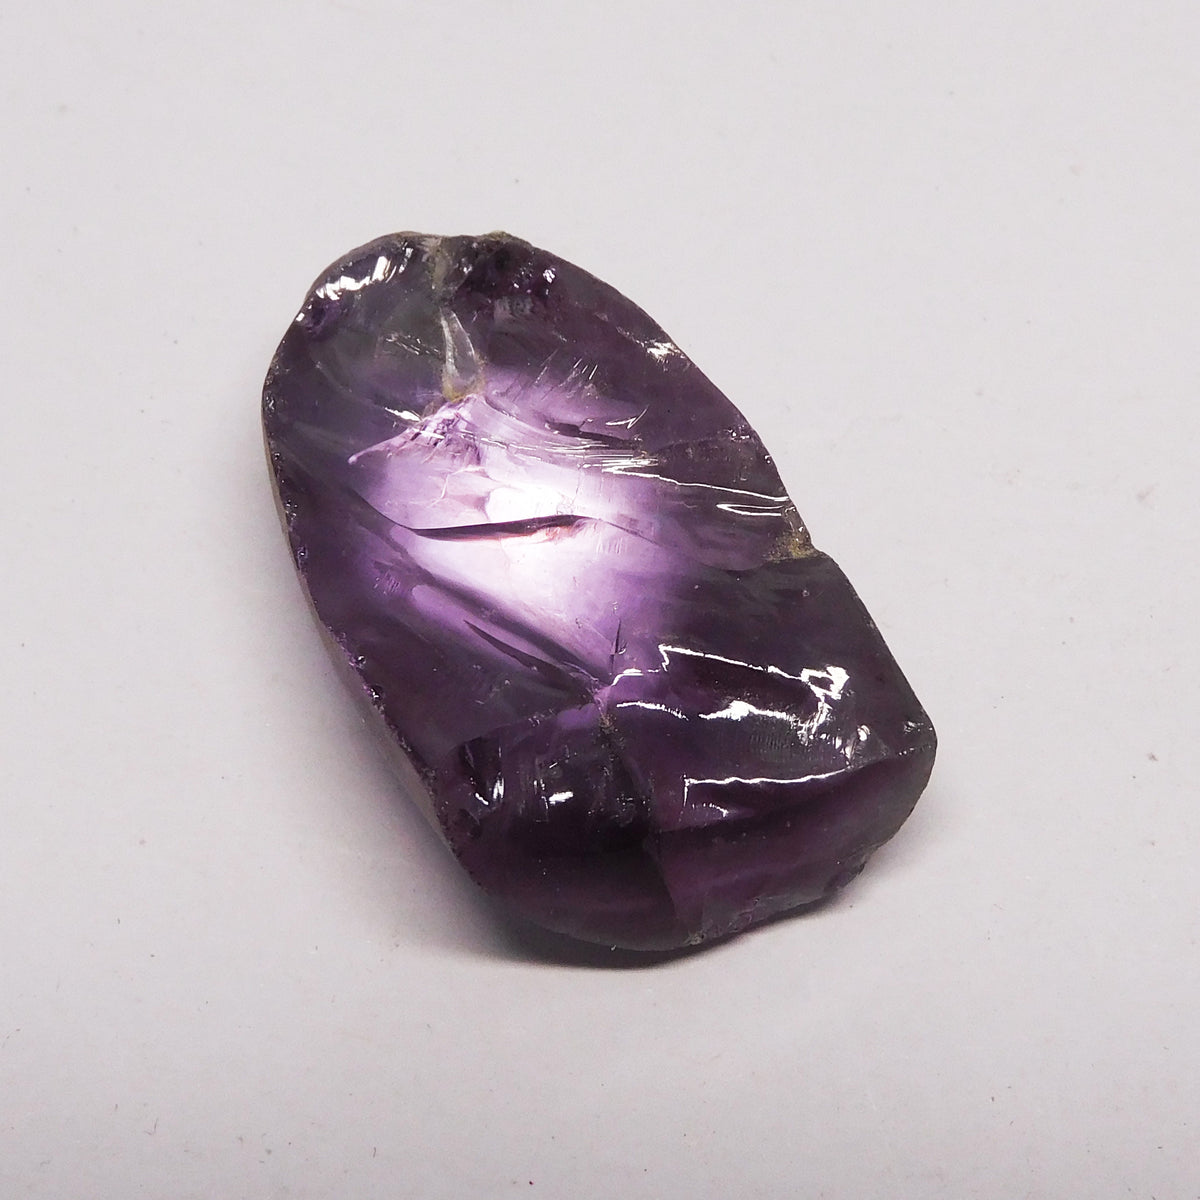 Special Offer On Alexandrite Rough !! 54.40 Carat Natural Color Change Alexandrite Rough From Russia Certified Loose Gemstone | Free Shipping Free Gift